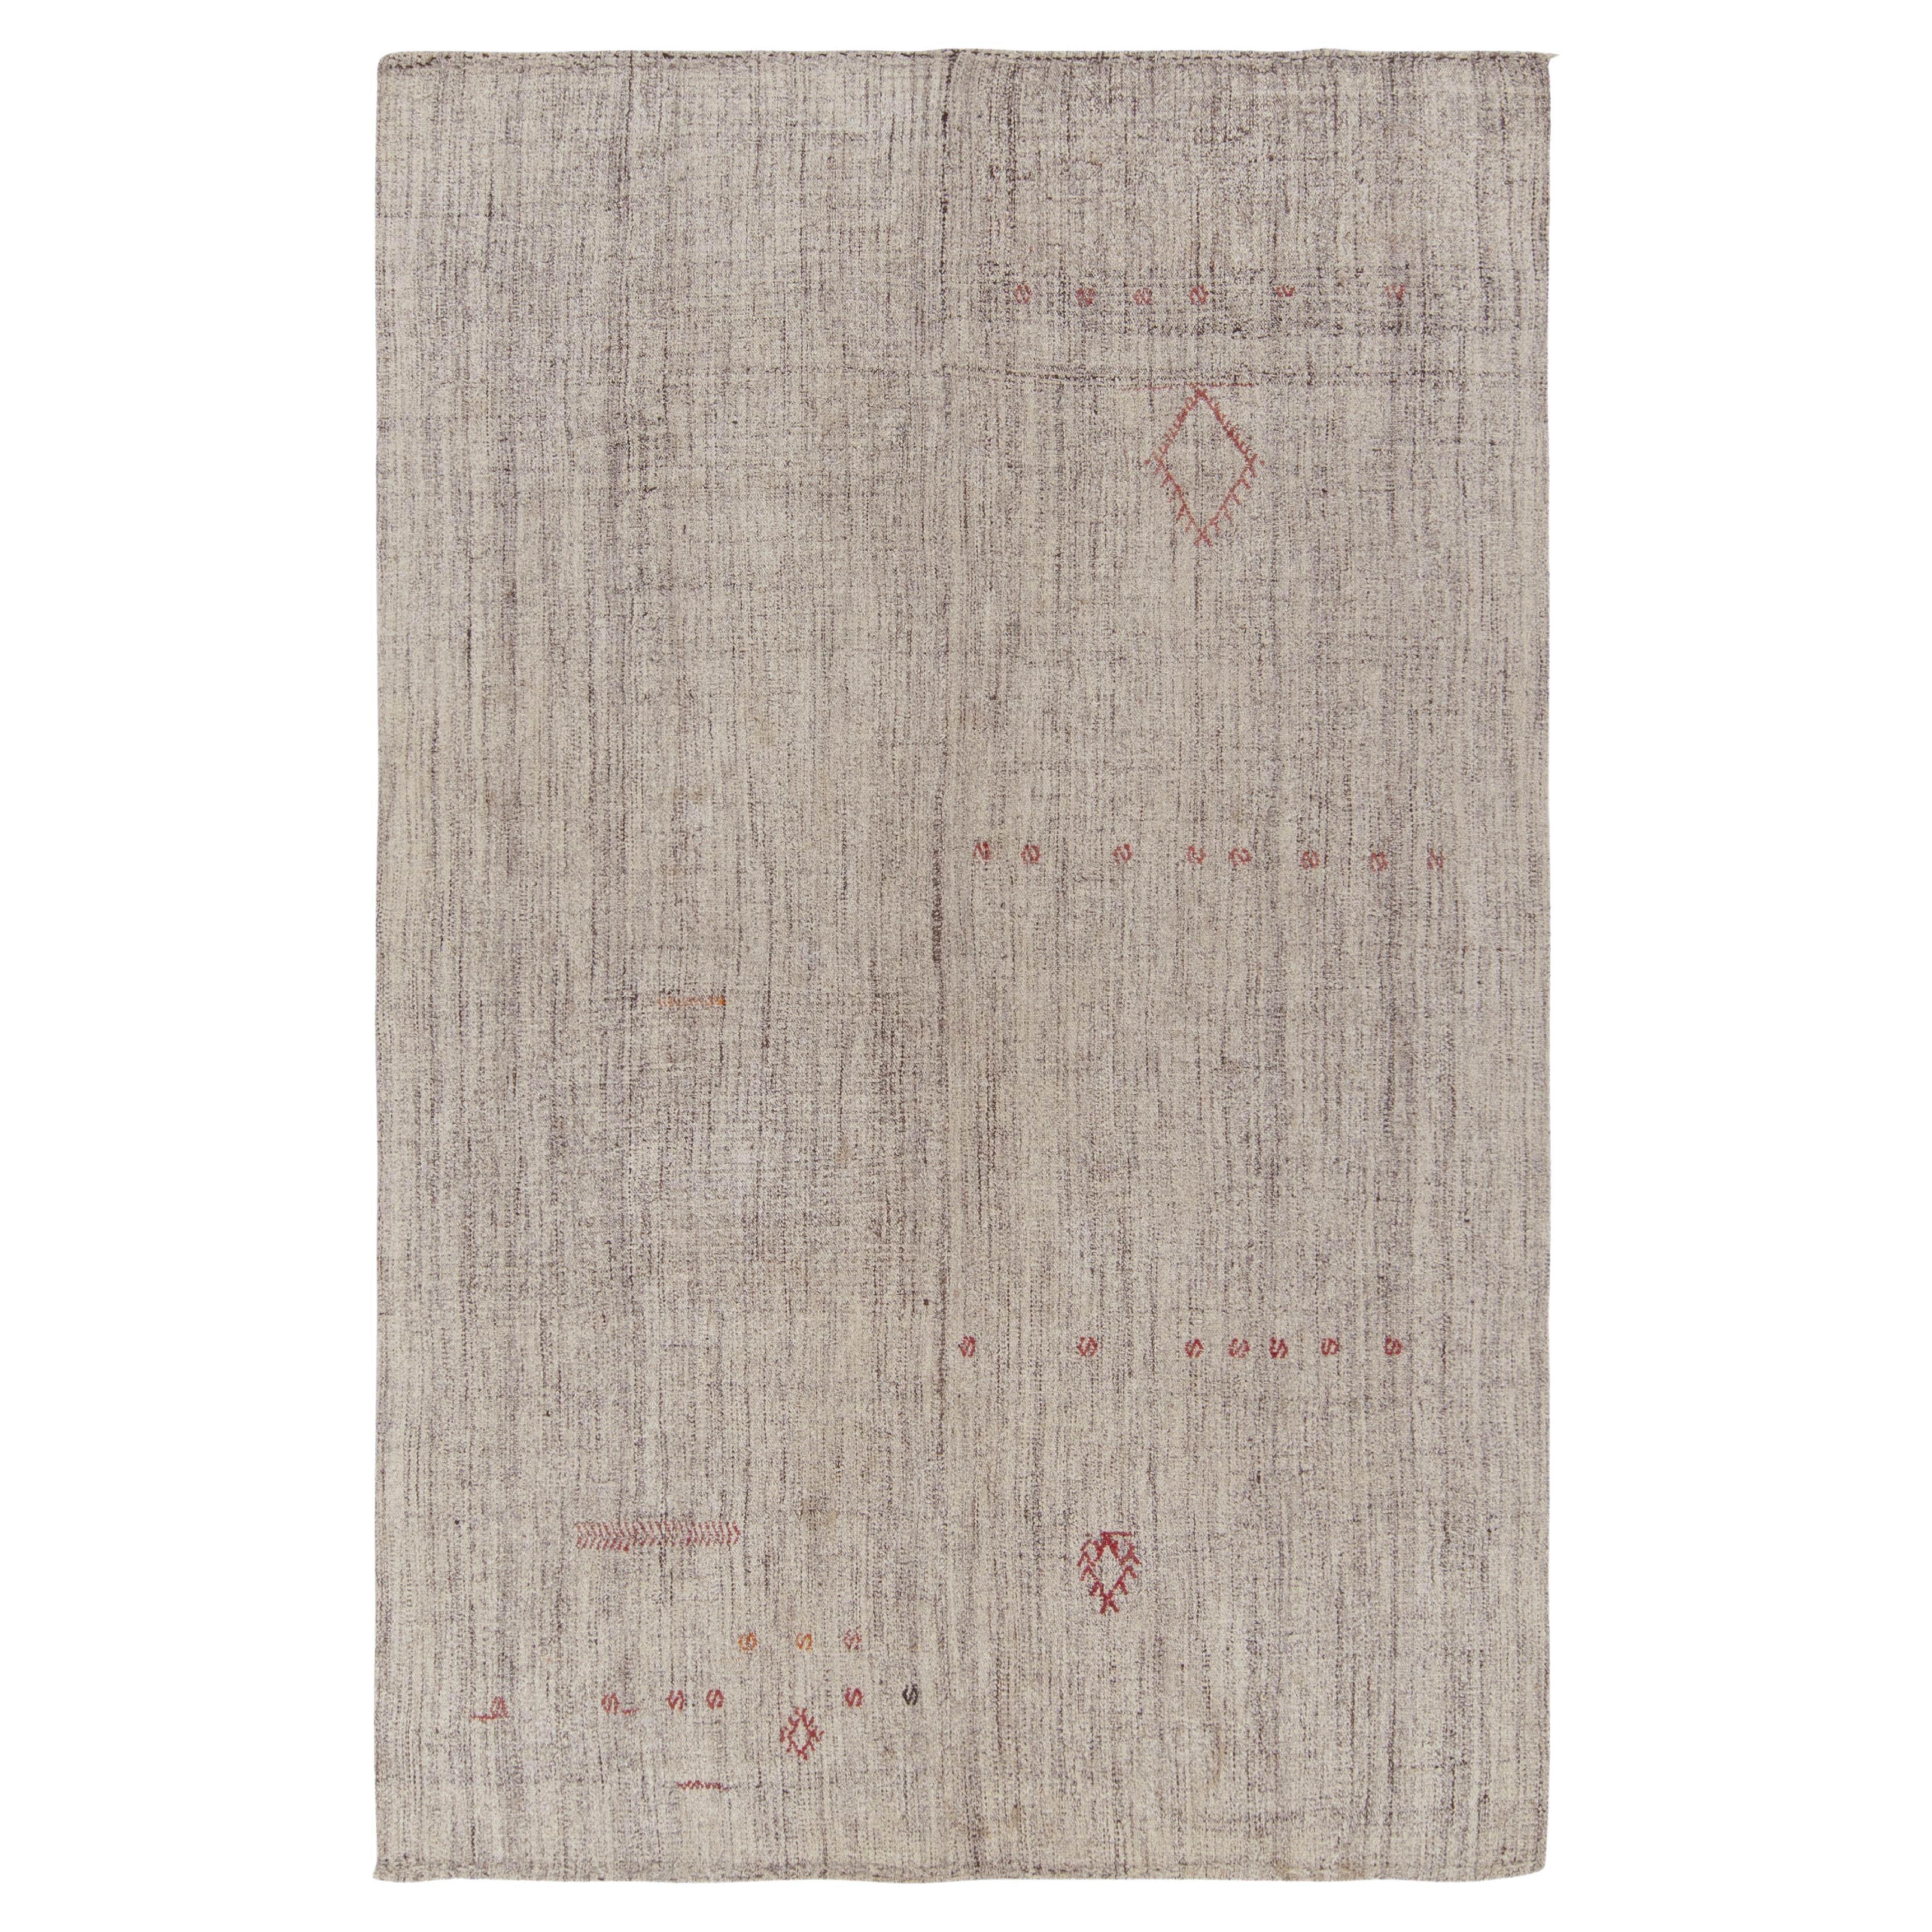 Rug & Kilim's Modern Kilim Striped Beige Gray and Green Transitional Flat-Weave For Sale